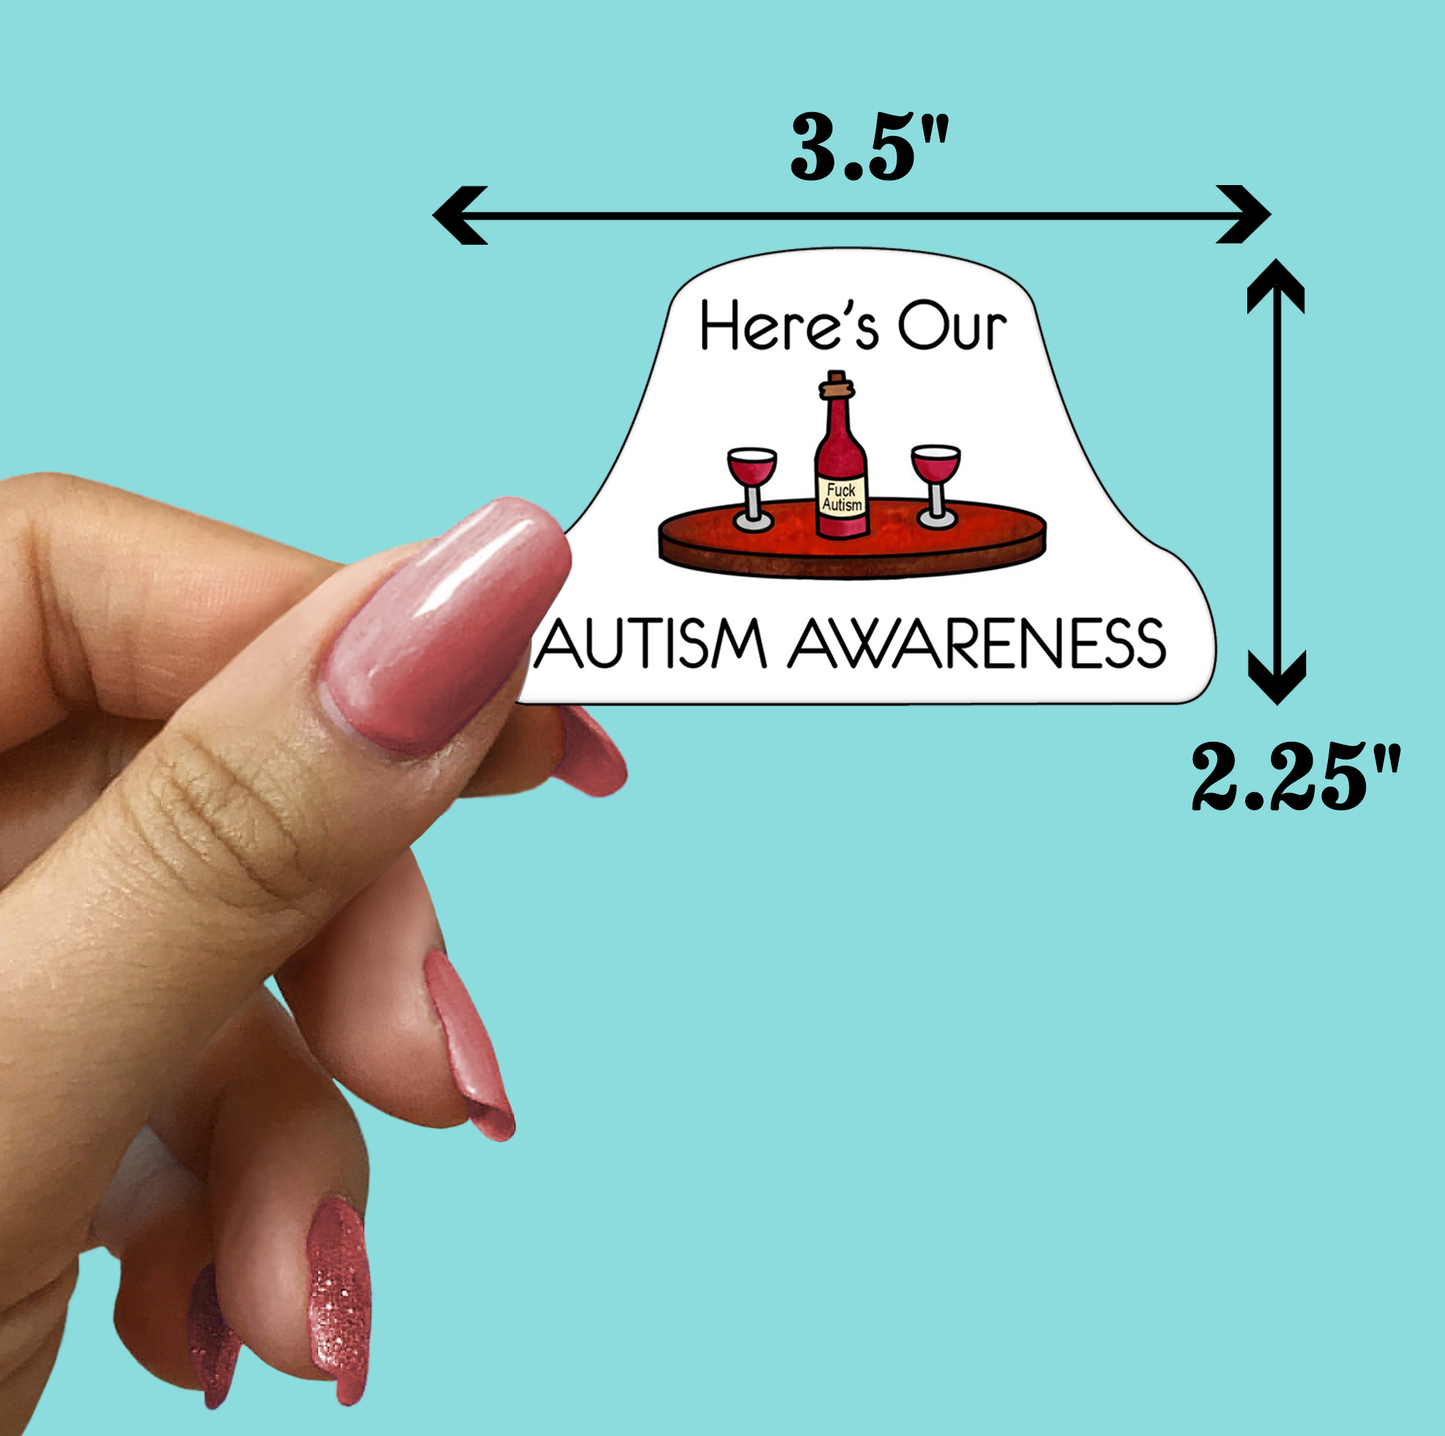 Here's Our Autism Awareness STICKER